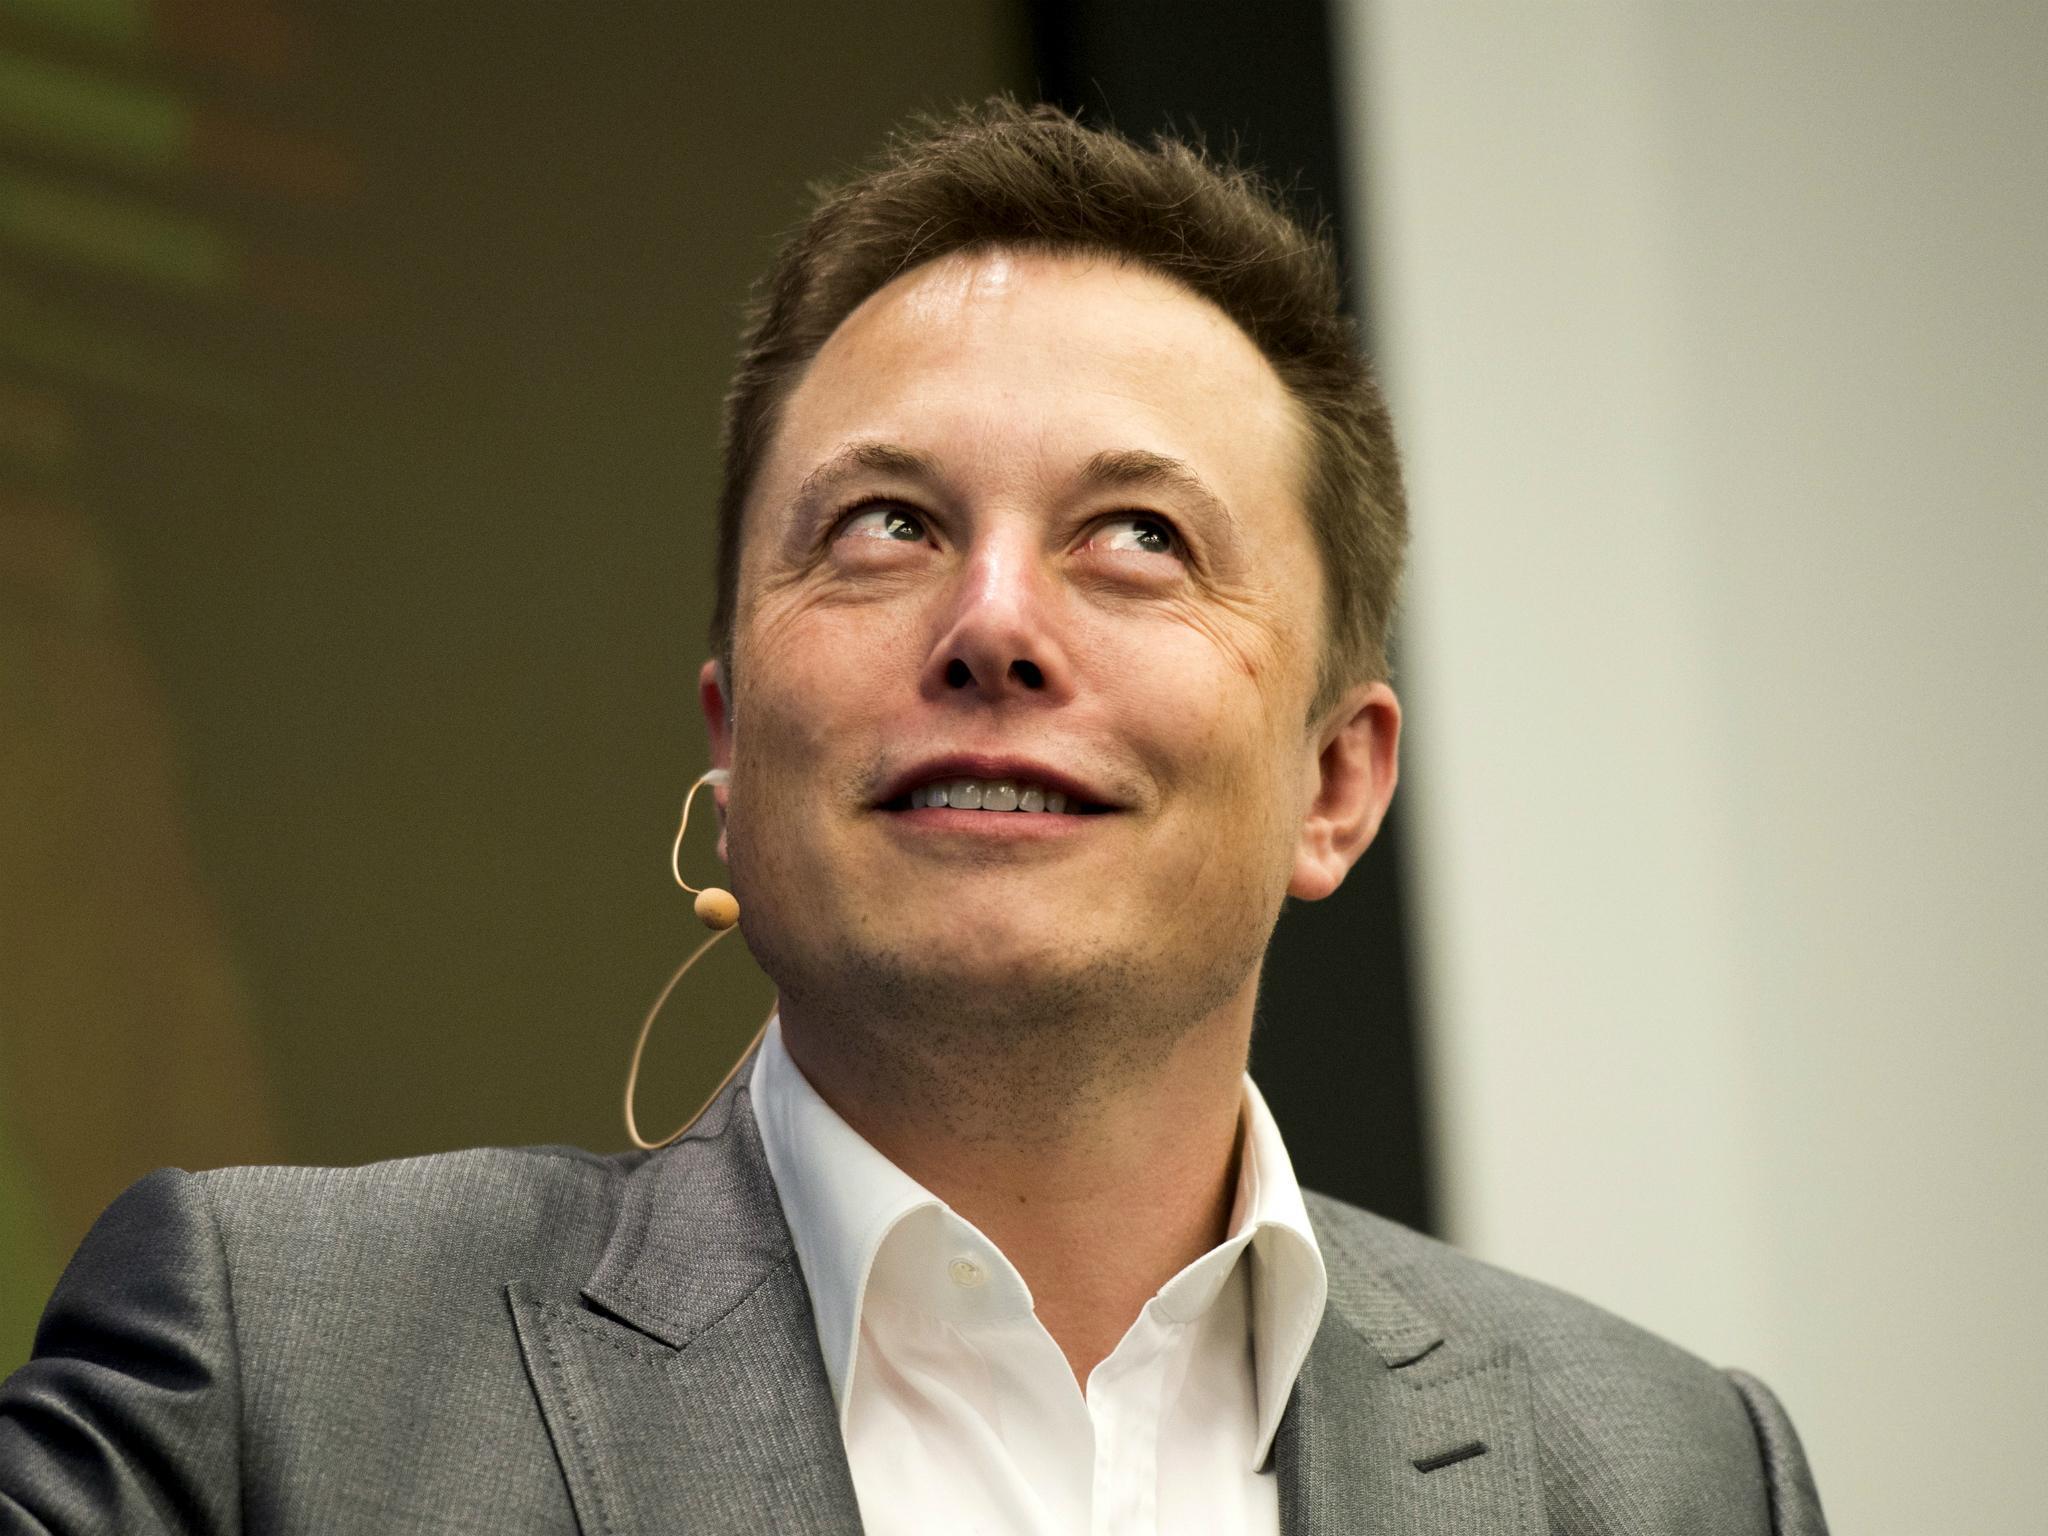 Elon Musk, Chairman of SolarCity and CEO of Tesla Motors, speaks at SolarCity's Inside Energy Summit in Manhattan, New York October 2, 2015